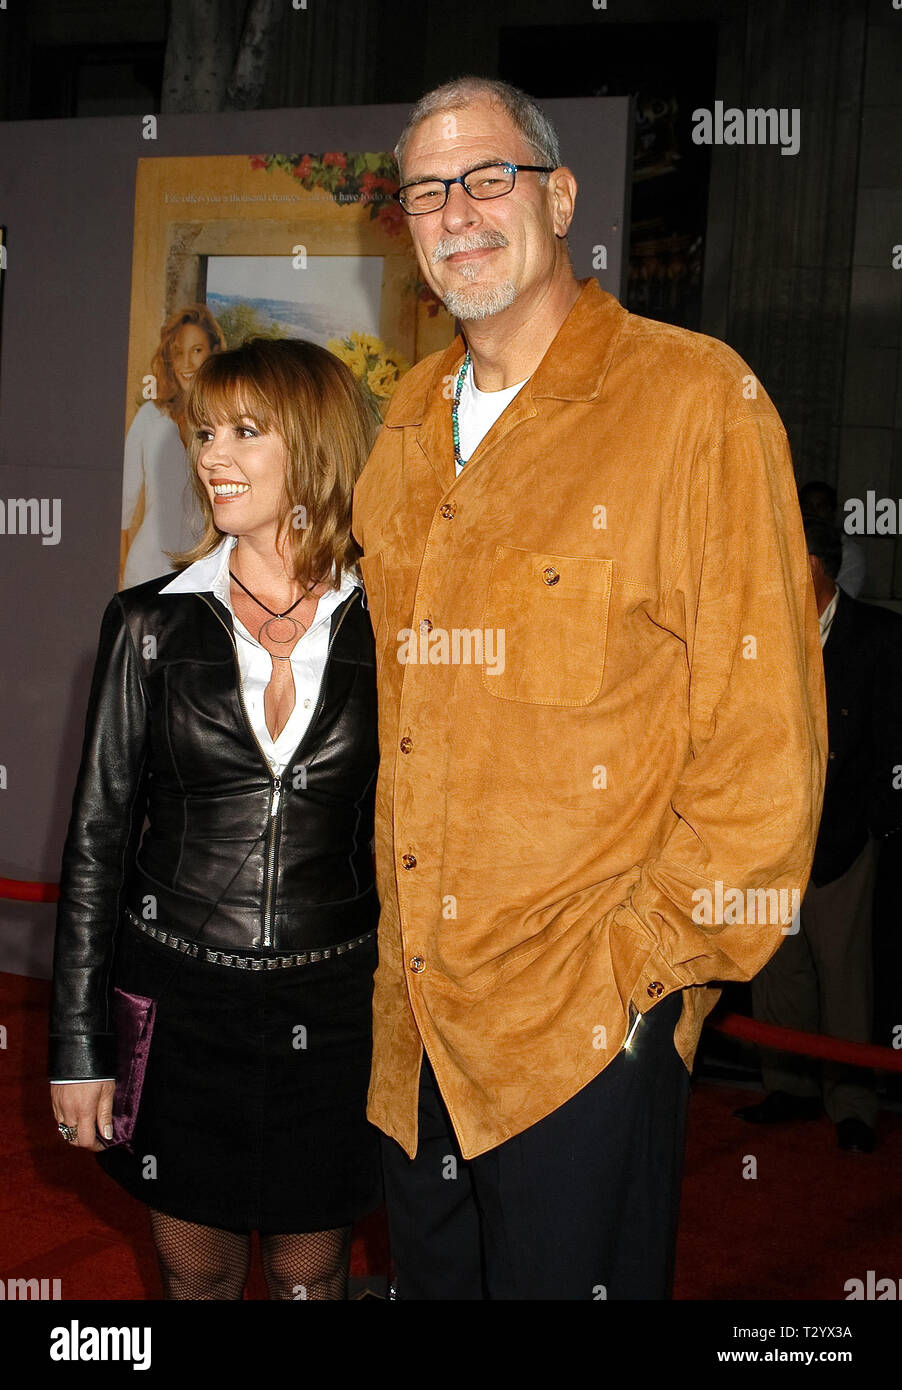 Phil Jackson & Jeanie Buss at the 'Under The Tuscan Sun' World Premiere at the El Capitan Theatre in Hollywood, CA. The event took place on Saturday, September 20, 2003.  Photo Credit: SBM / PictureLux  File Reference # 33790 482SBMPLX Stock Photo